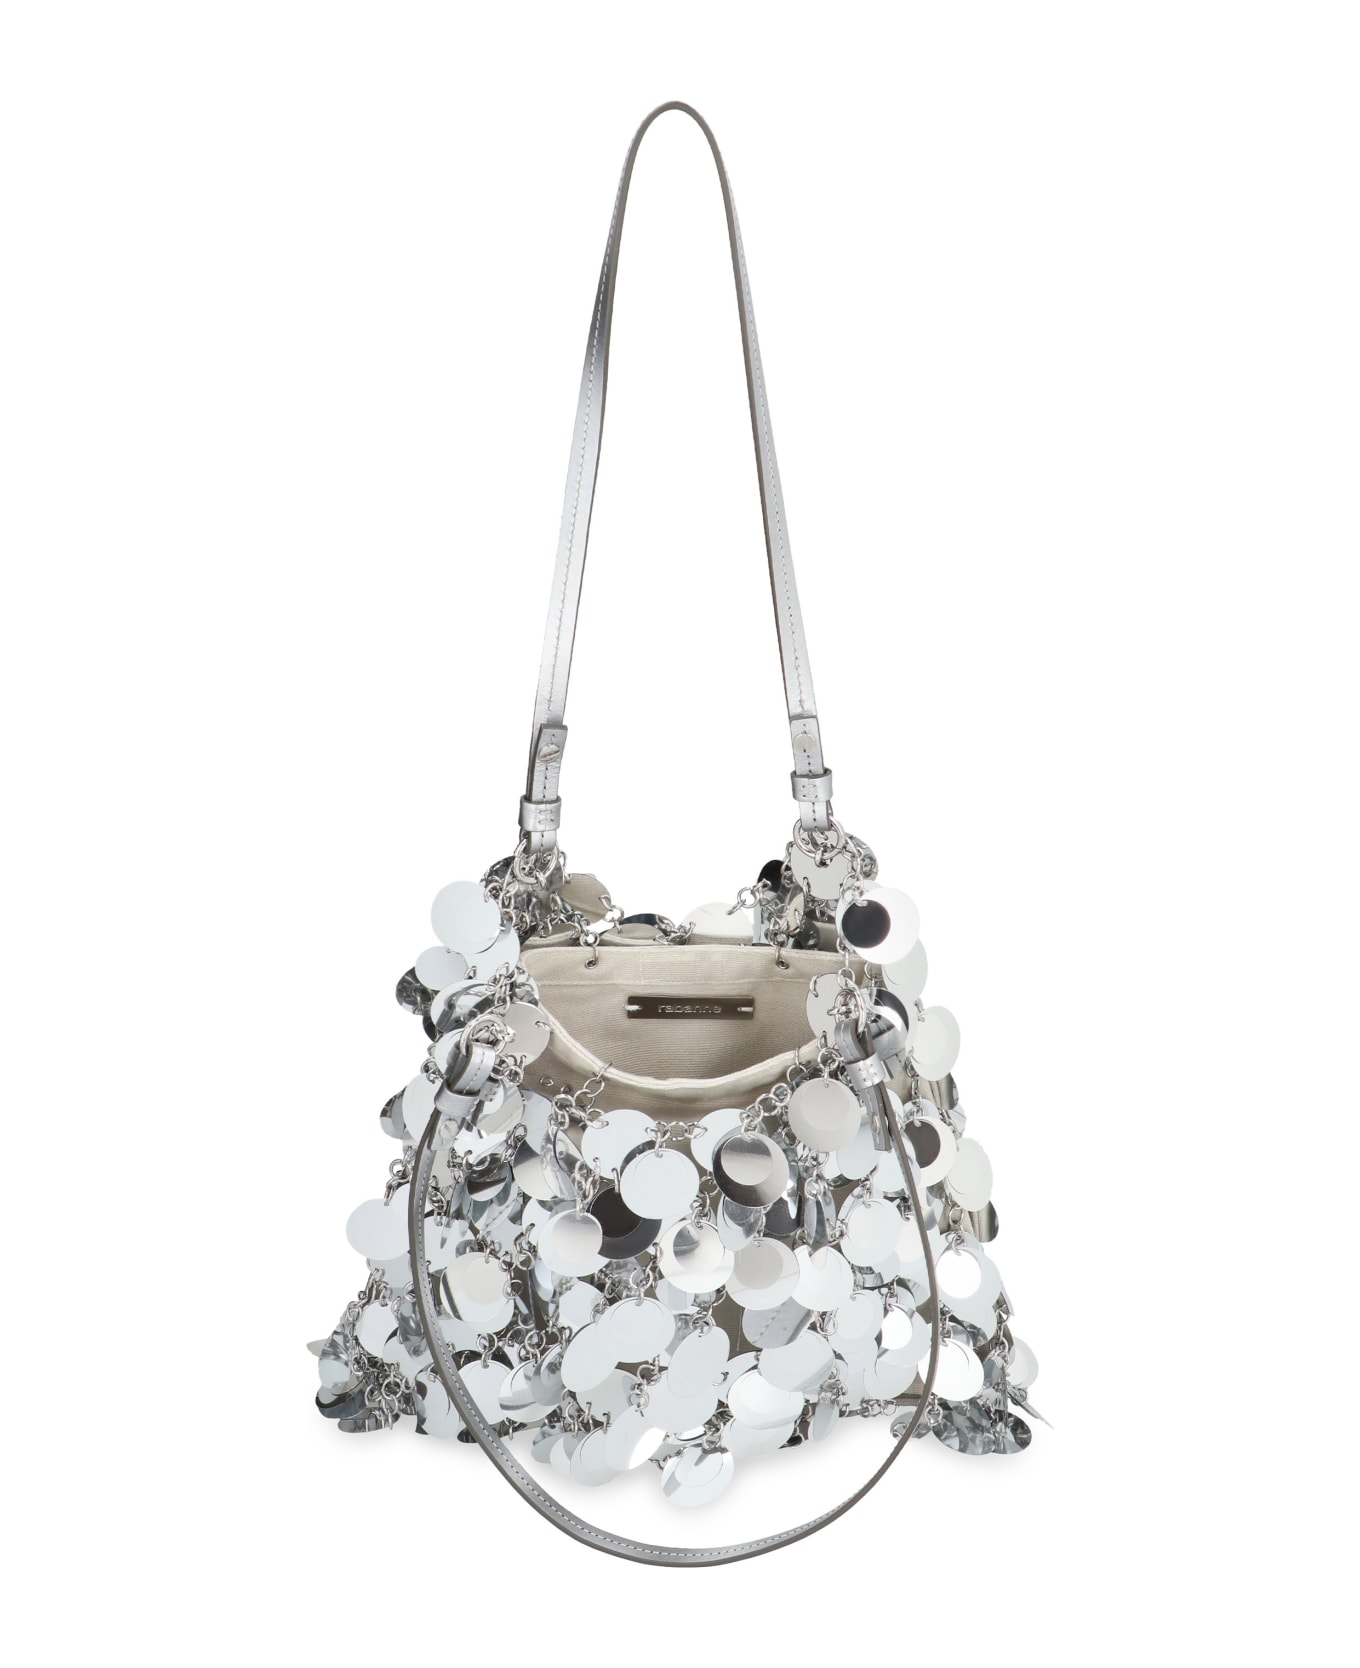 Paco Rabanne Sparkles Tote Bag - silver